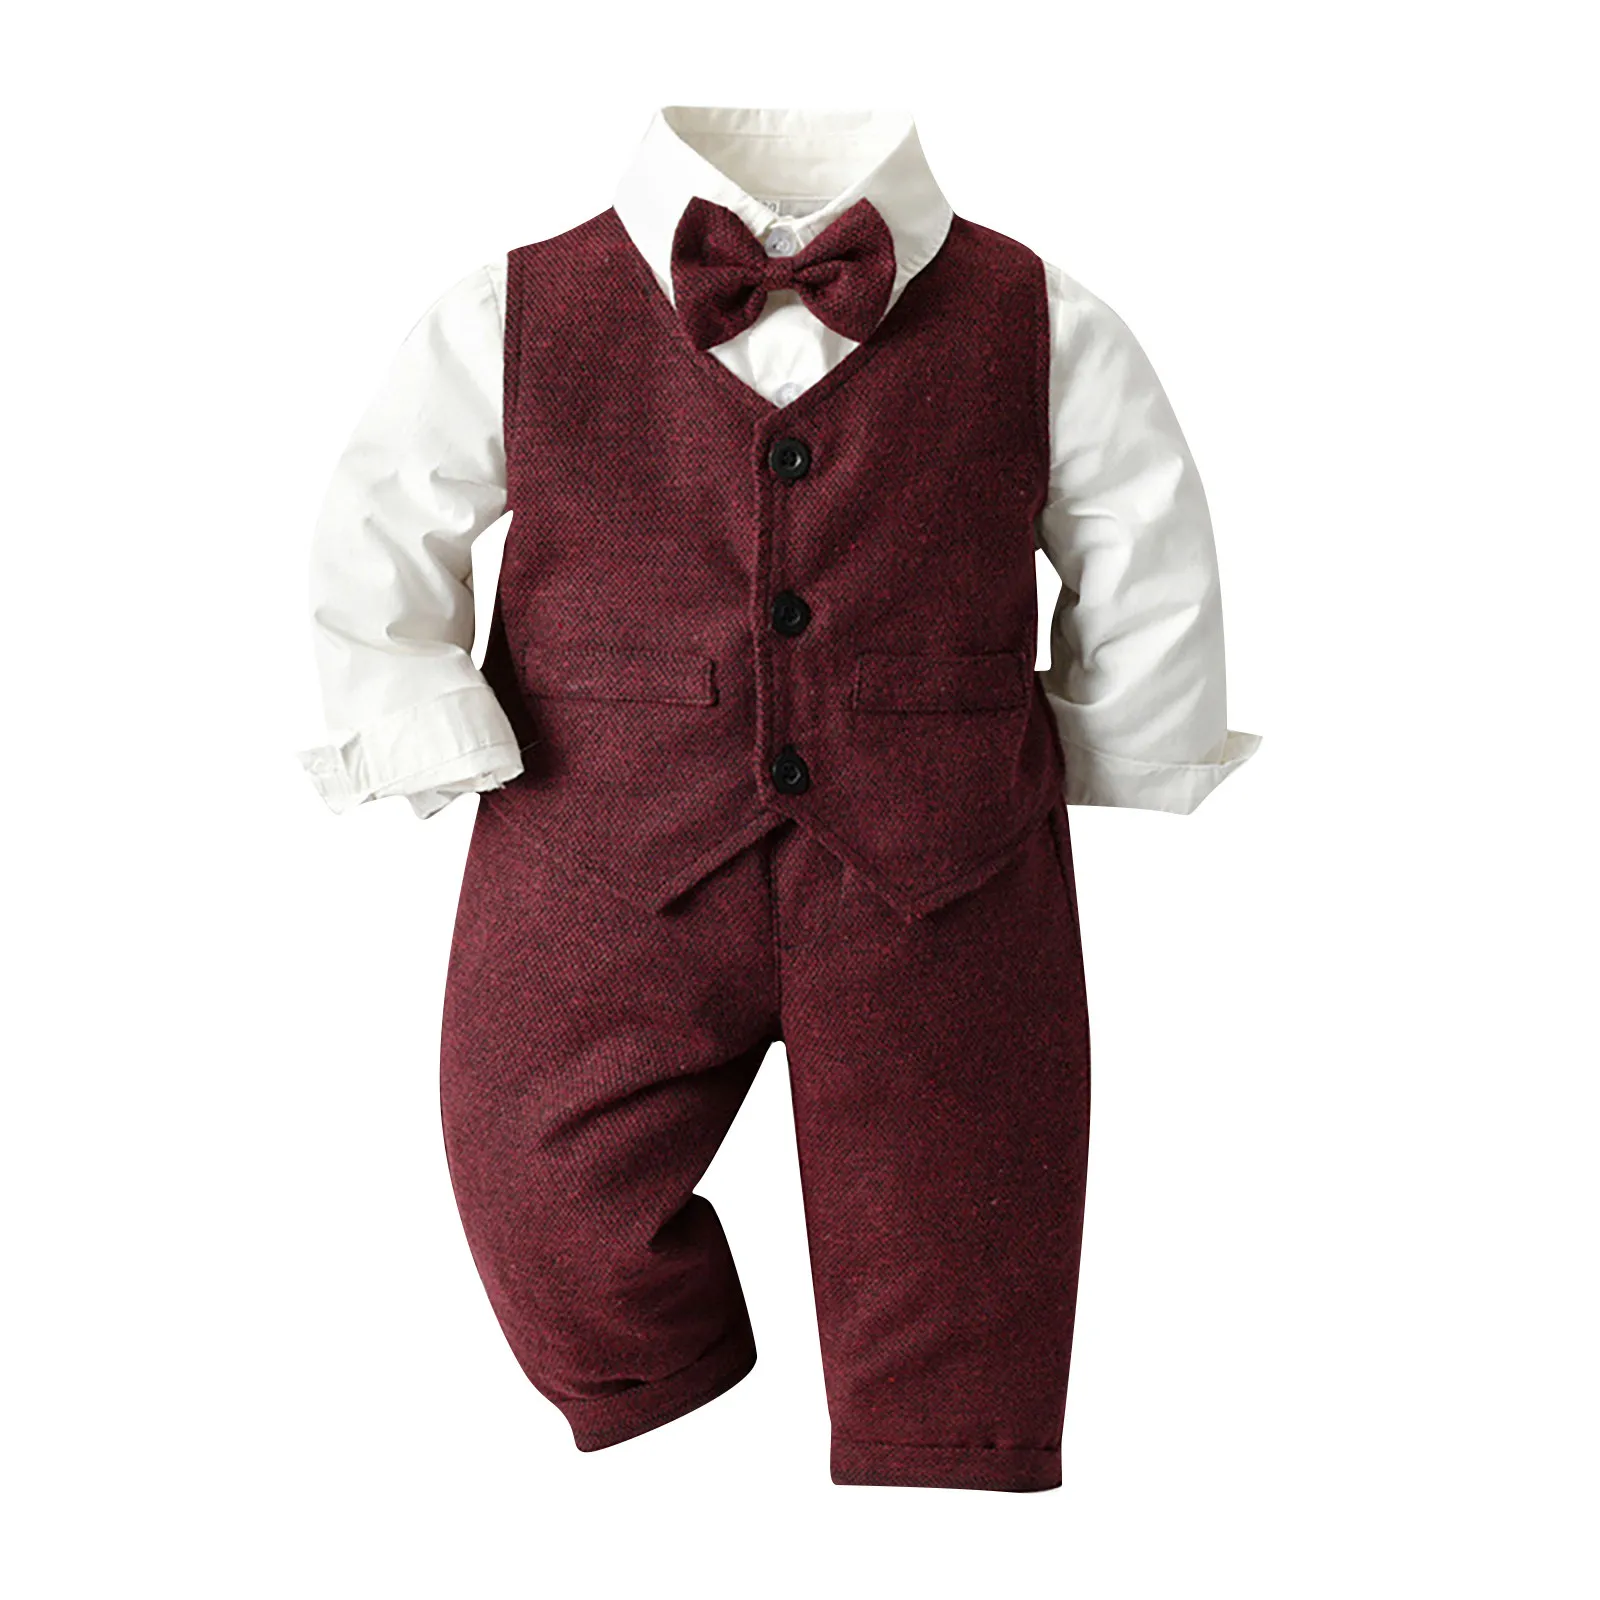 

Gentleman Outfits Autumn Childrens Sets Christmas Baby Boys Business Suit Shirt+Vast+Pants Sets For Boys Formal Party 1 to 6 Age